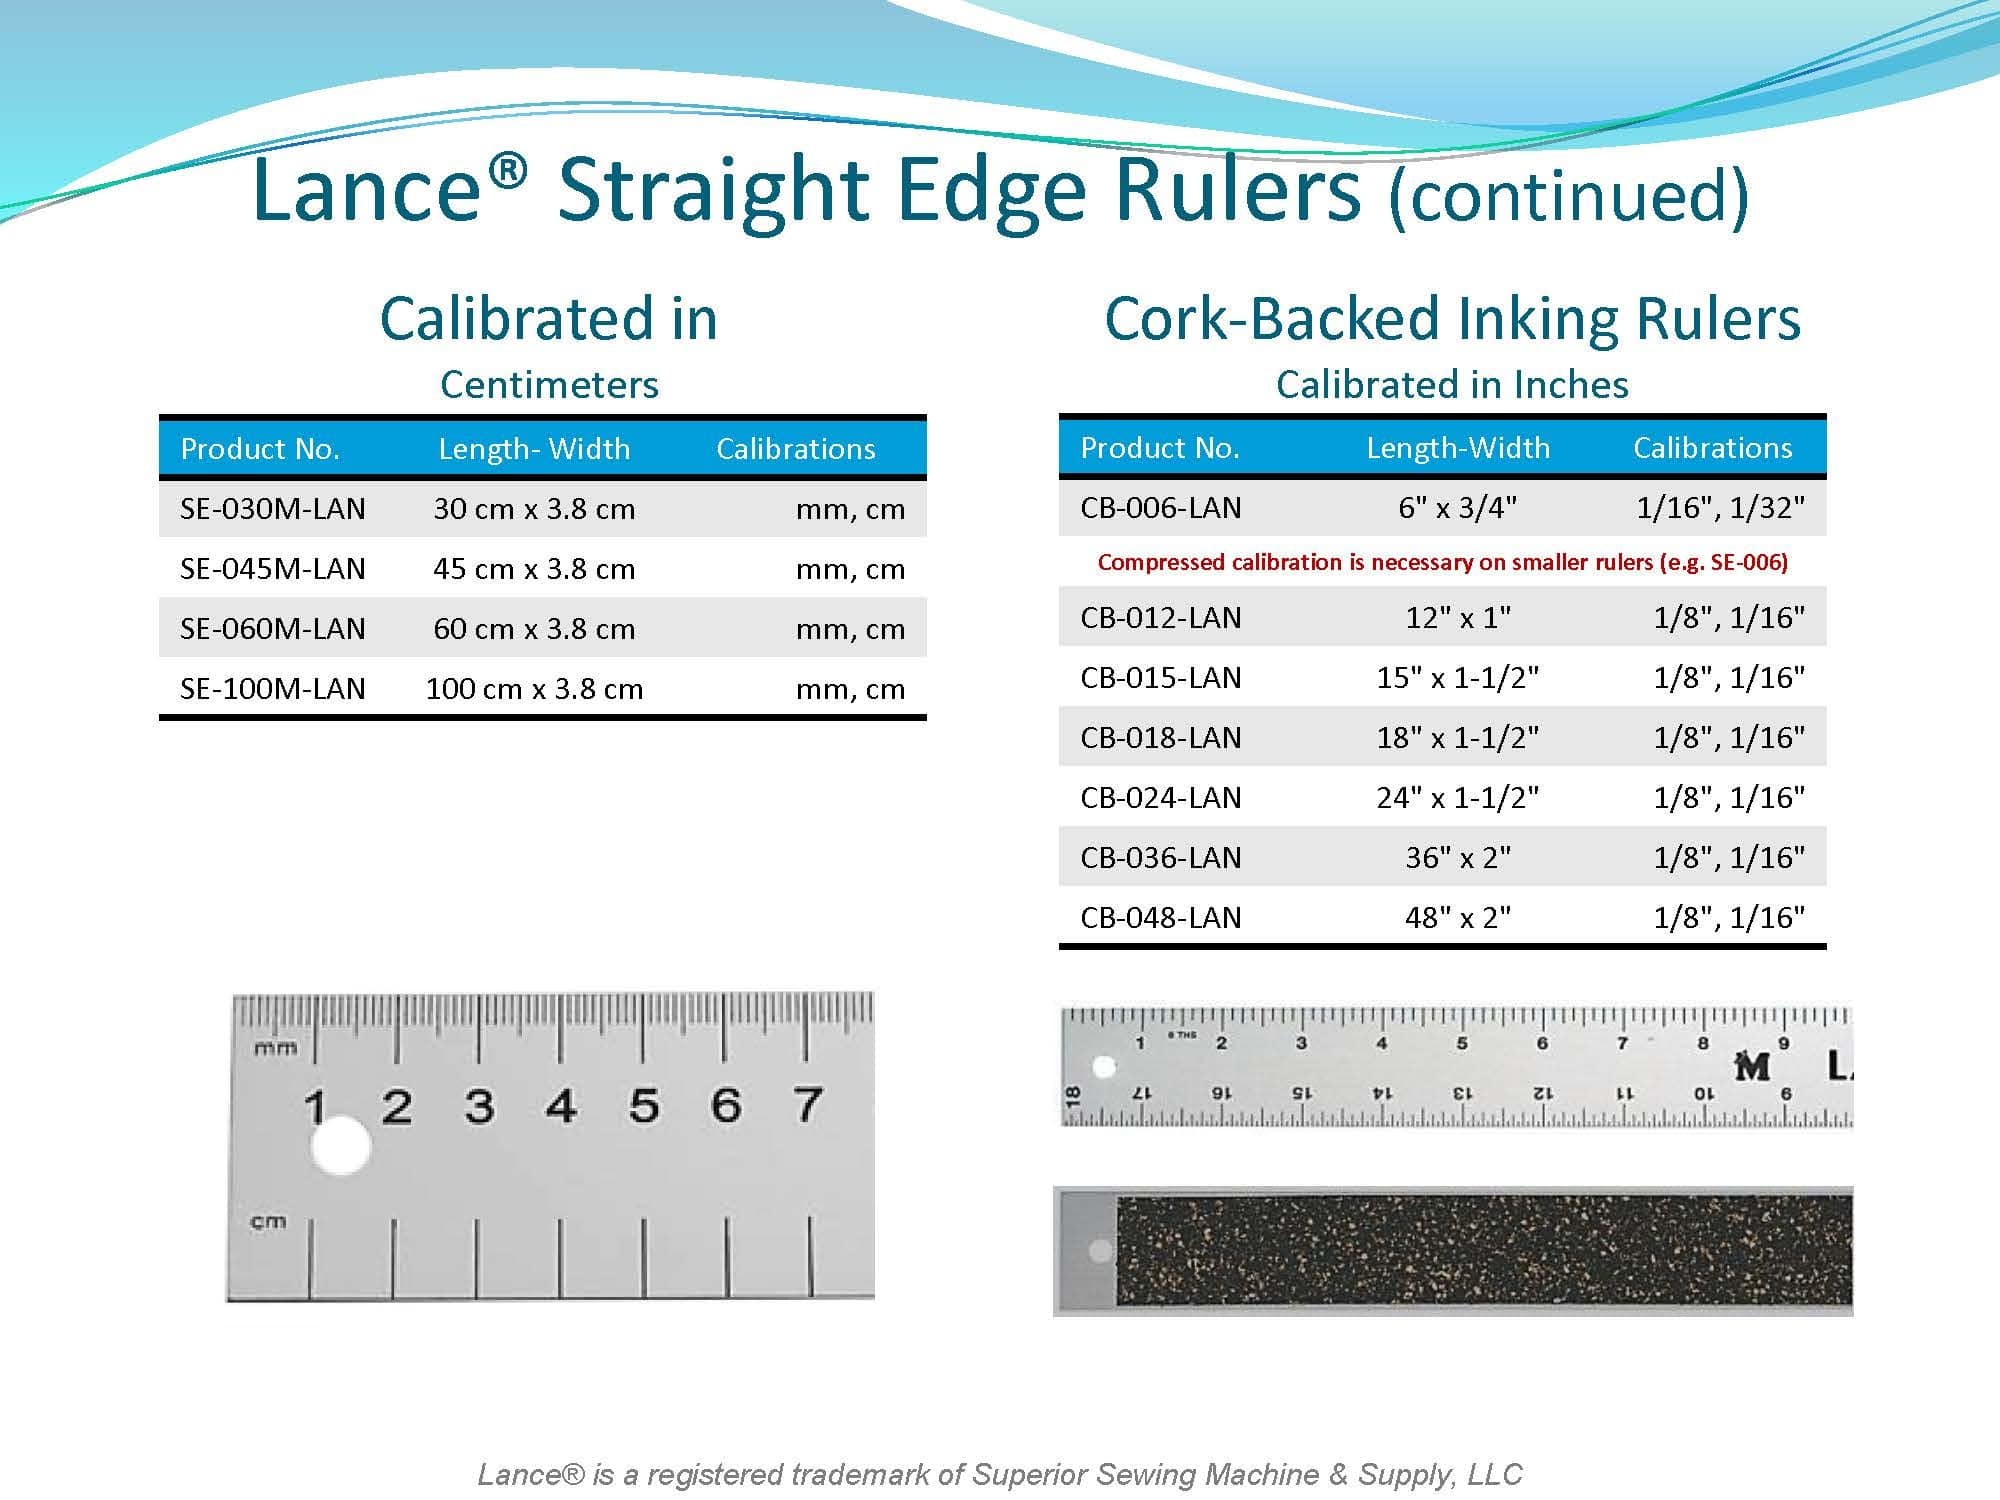 LANCE STRAIGHT EDGE RULES
CALIBRATED IN CENTIMETERS
SE-030M-LAN - 30cm X 3.8cm
SE-045M-LAN - 45cm X 3.8cm
 SE-060M-LAN - 60cm X 3.8cm
SE-100M-LAN - 100cm X 3.8c